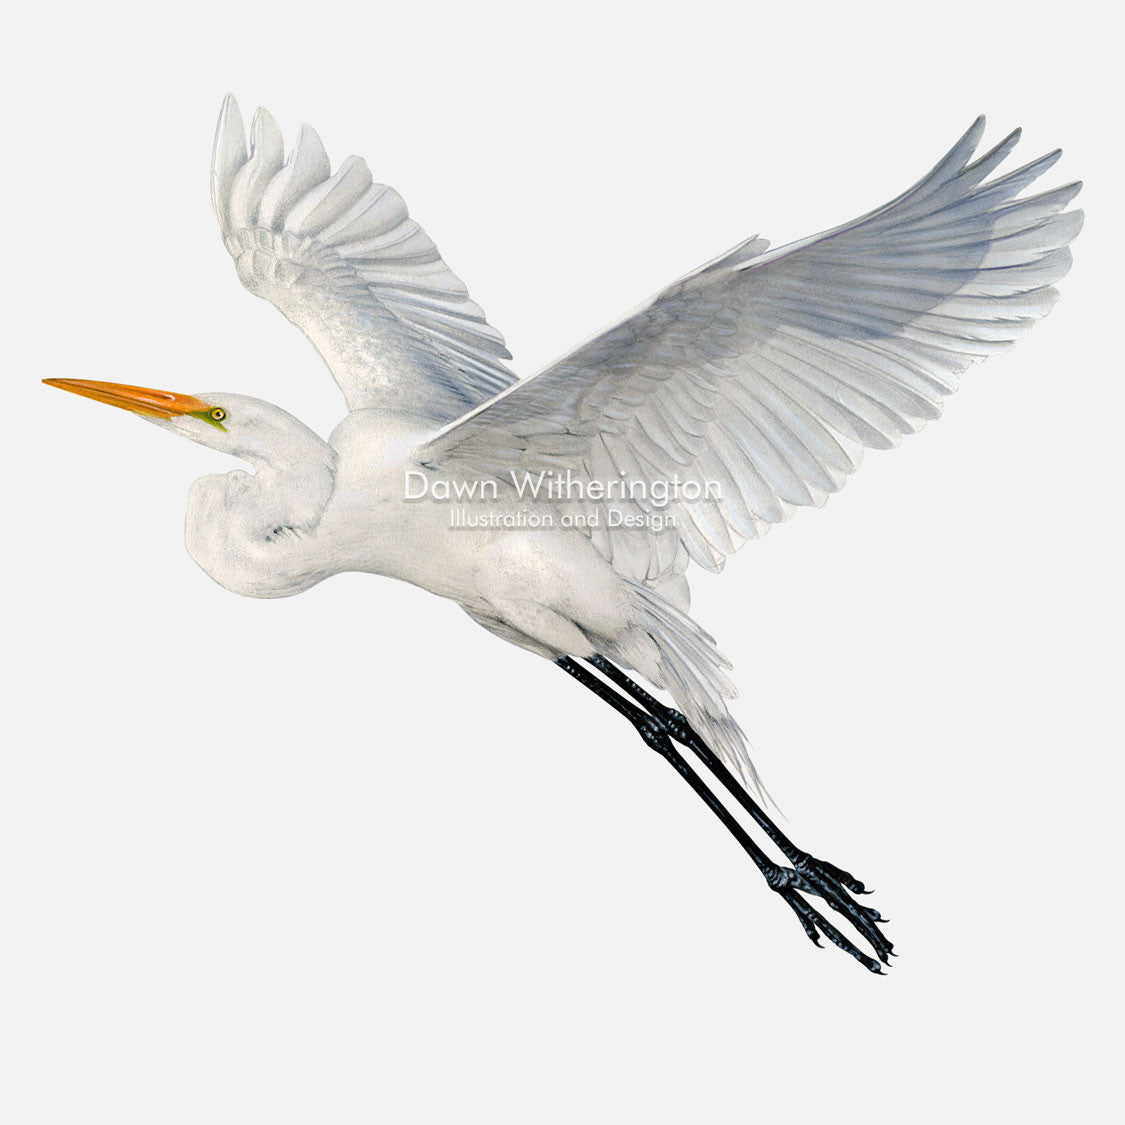 This beautiful illustration of a great egret, Ardea alba, in flight, is biologically accurate in detail.